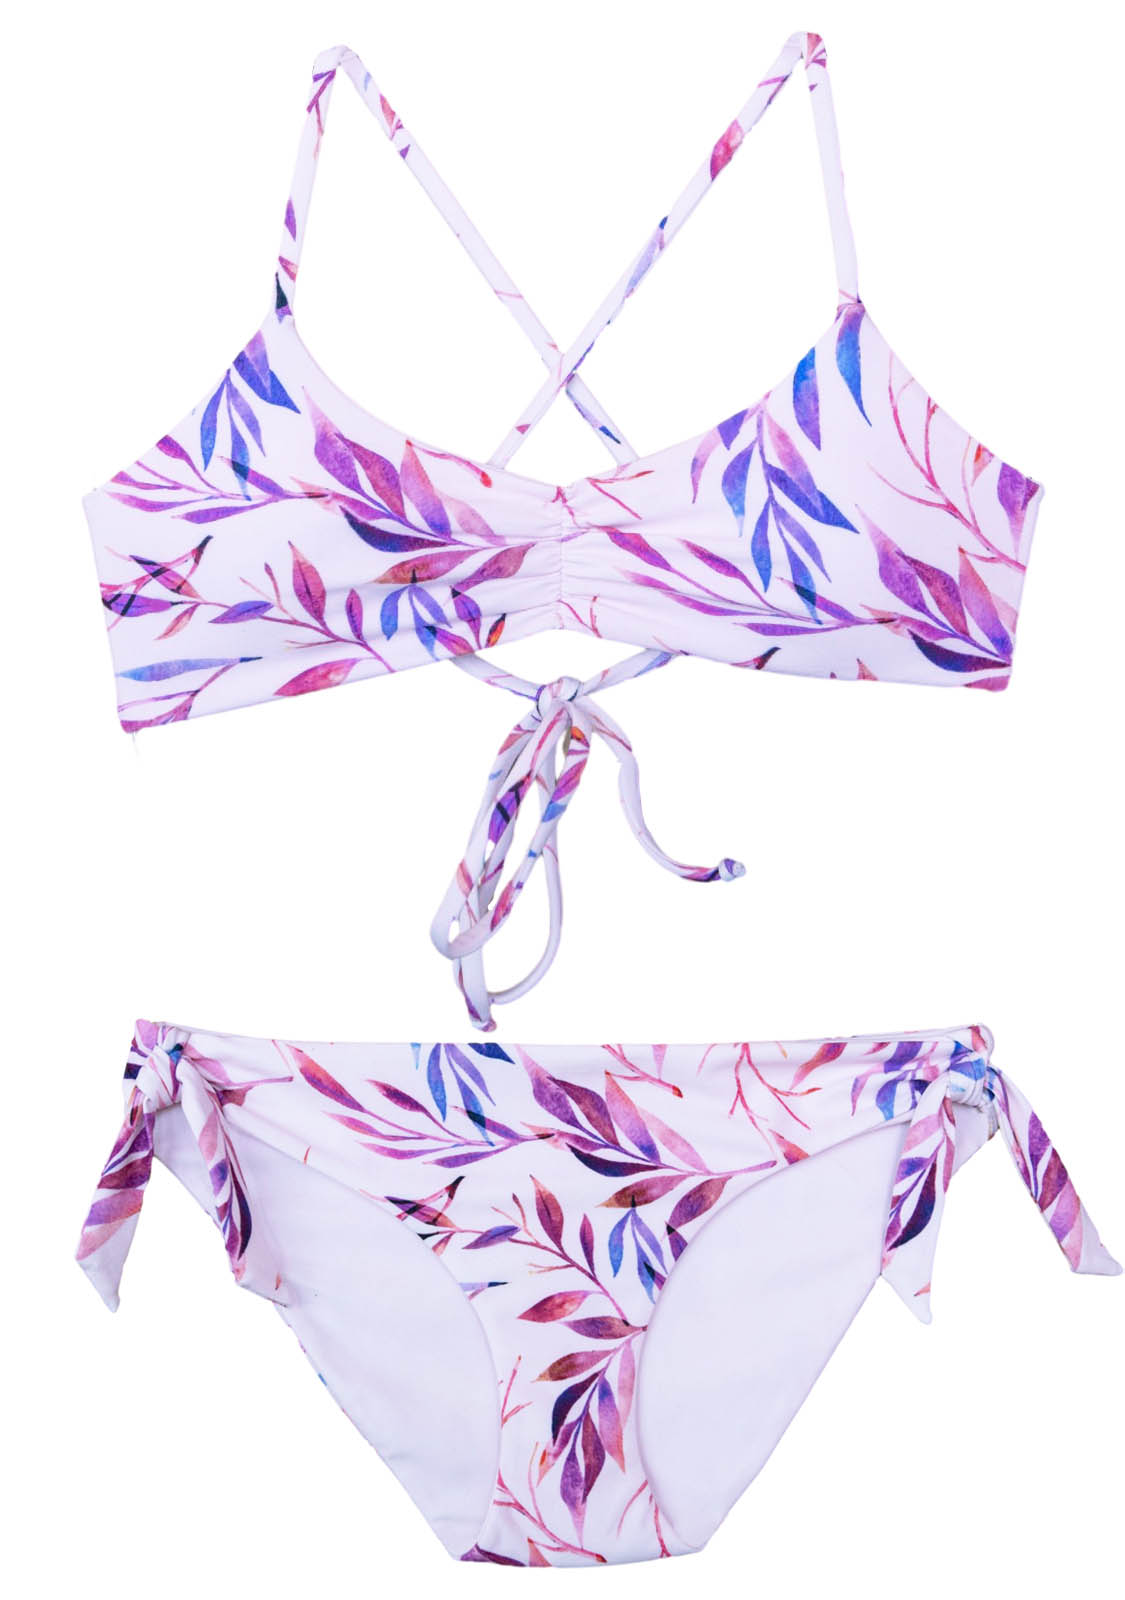 Two Piece Bikini Swimsuit with a Pink, Violet, Red, Fuchsia and Tropical design for Girls Teens